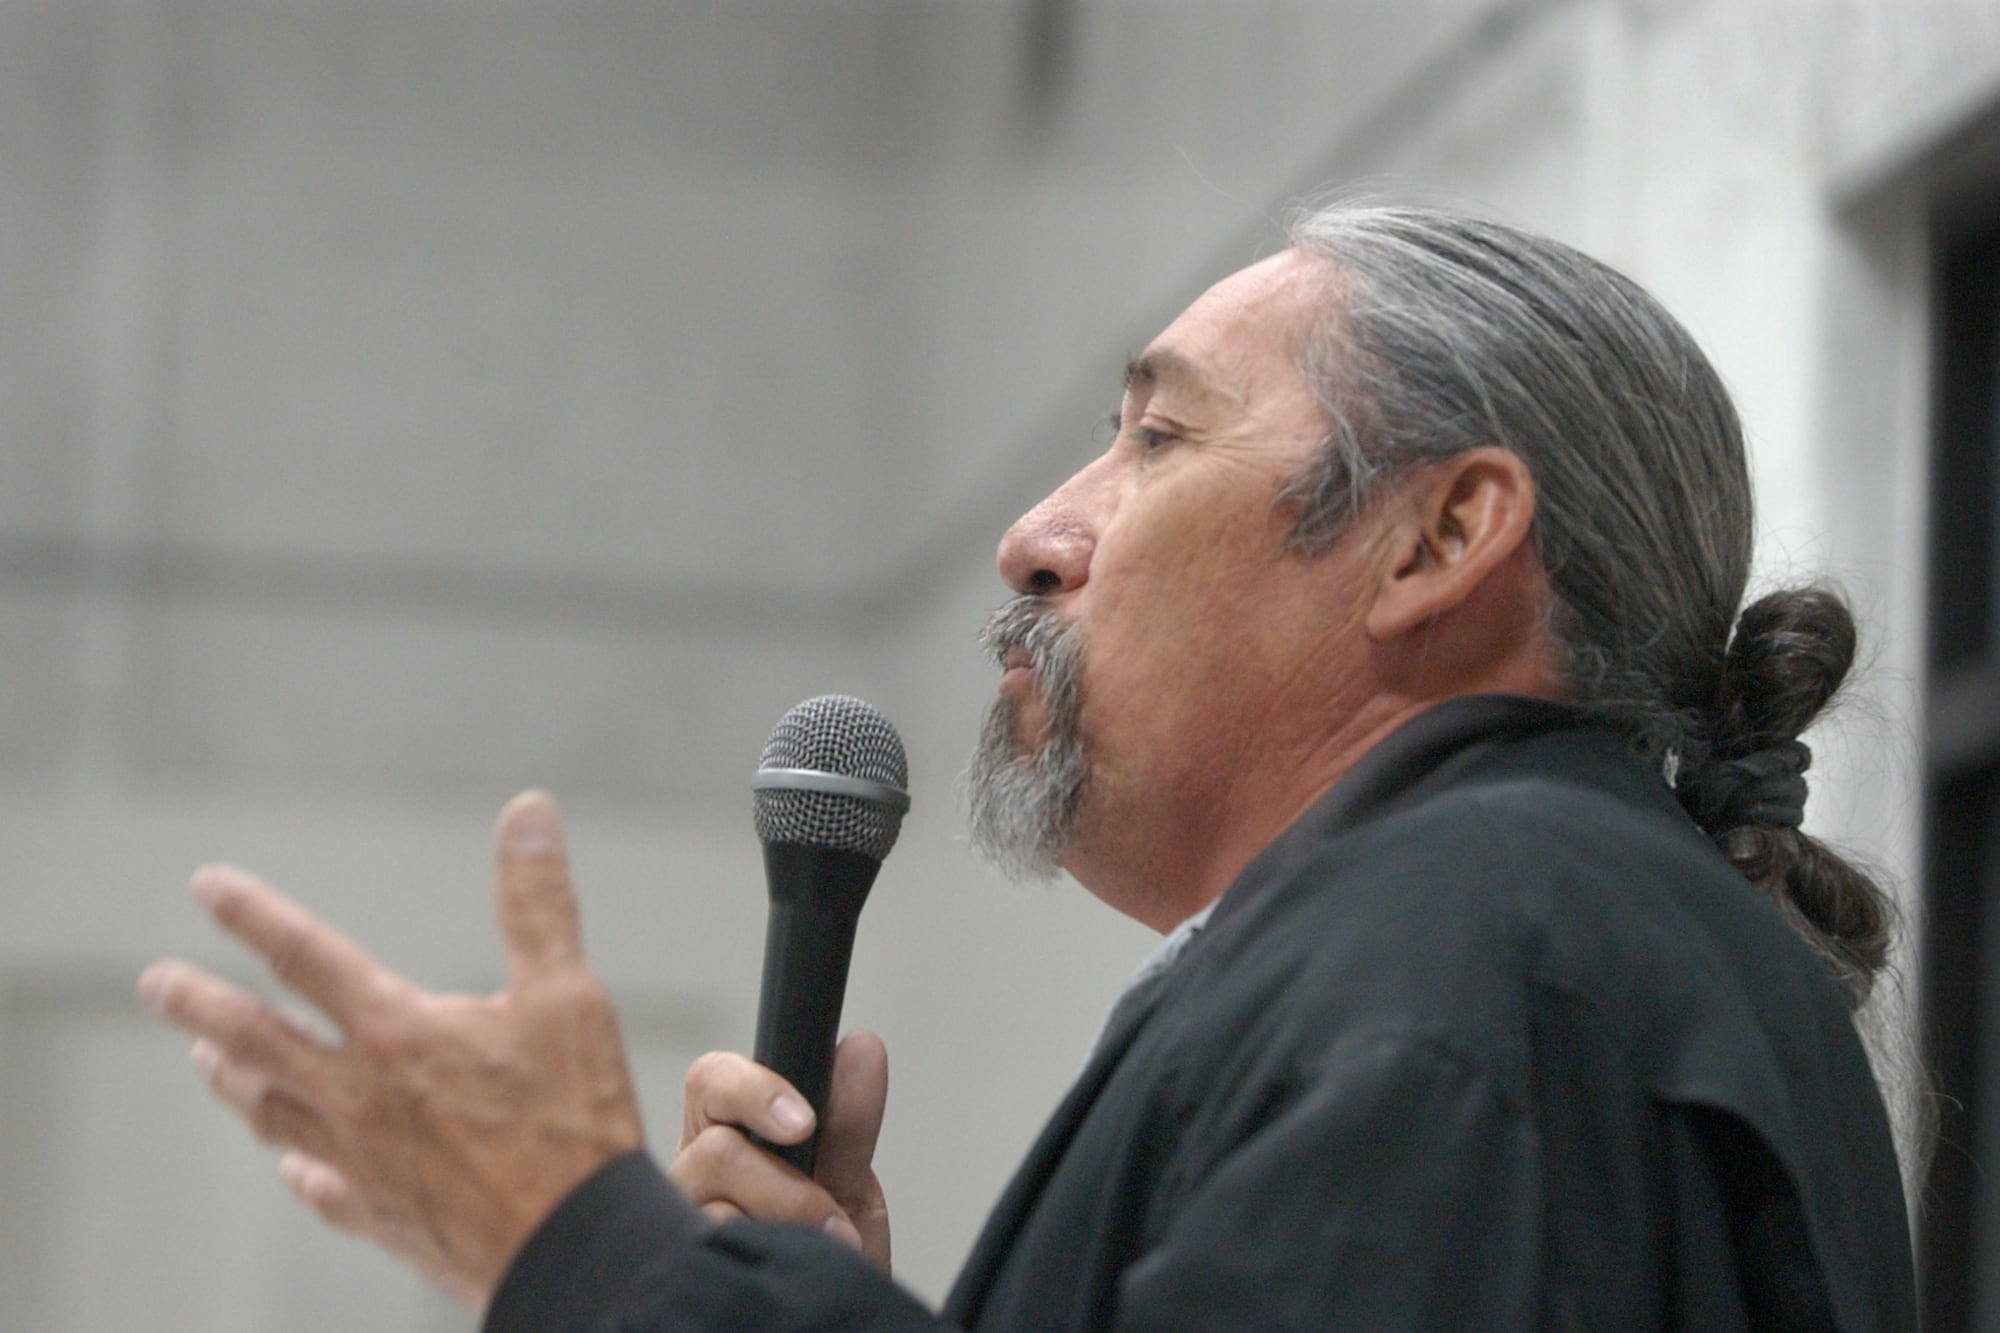 A middle-aged man dressed in black, with long gray hair pulled back into a knot, speaks into a microphone. He’s seen in profile, facing left, and he’s gesturing with his hand as he speaks.